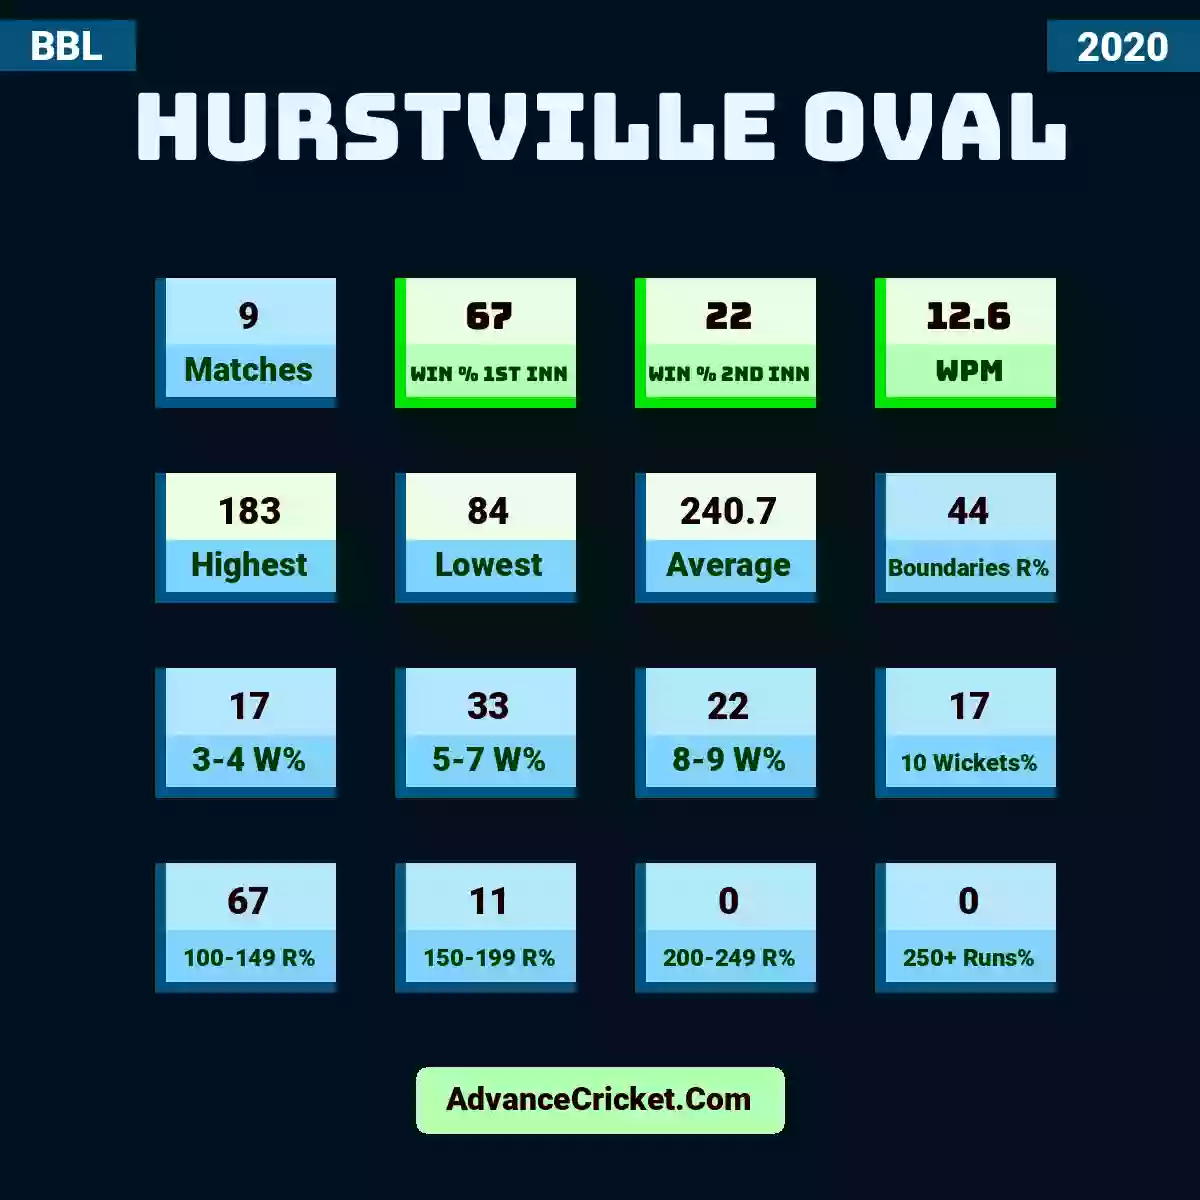 Image showing Hurstville Oval with Matches: 9, Win % 1st Inn: 67, Win % 2nd Inn: 22, WPM: 12.6, Highest: 183, Lowest: 84, Average: 240.7, Boundaries R%: 44, 3-4 W%: 17, 5-7 W%: 33, 8-9 W%: 22, 10 Wickets%: 17, 100-149 R%: 67, 150-199 R%: 11, 200-249 R%: 0, 250+ Runs%: 0.